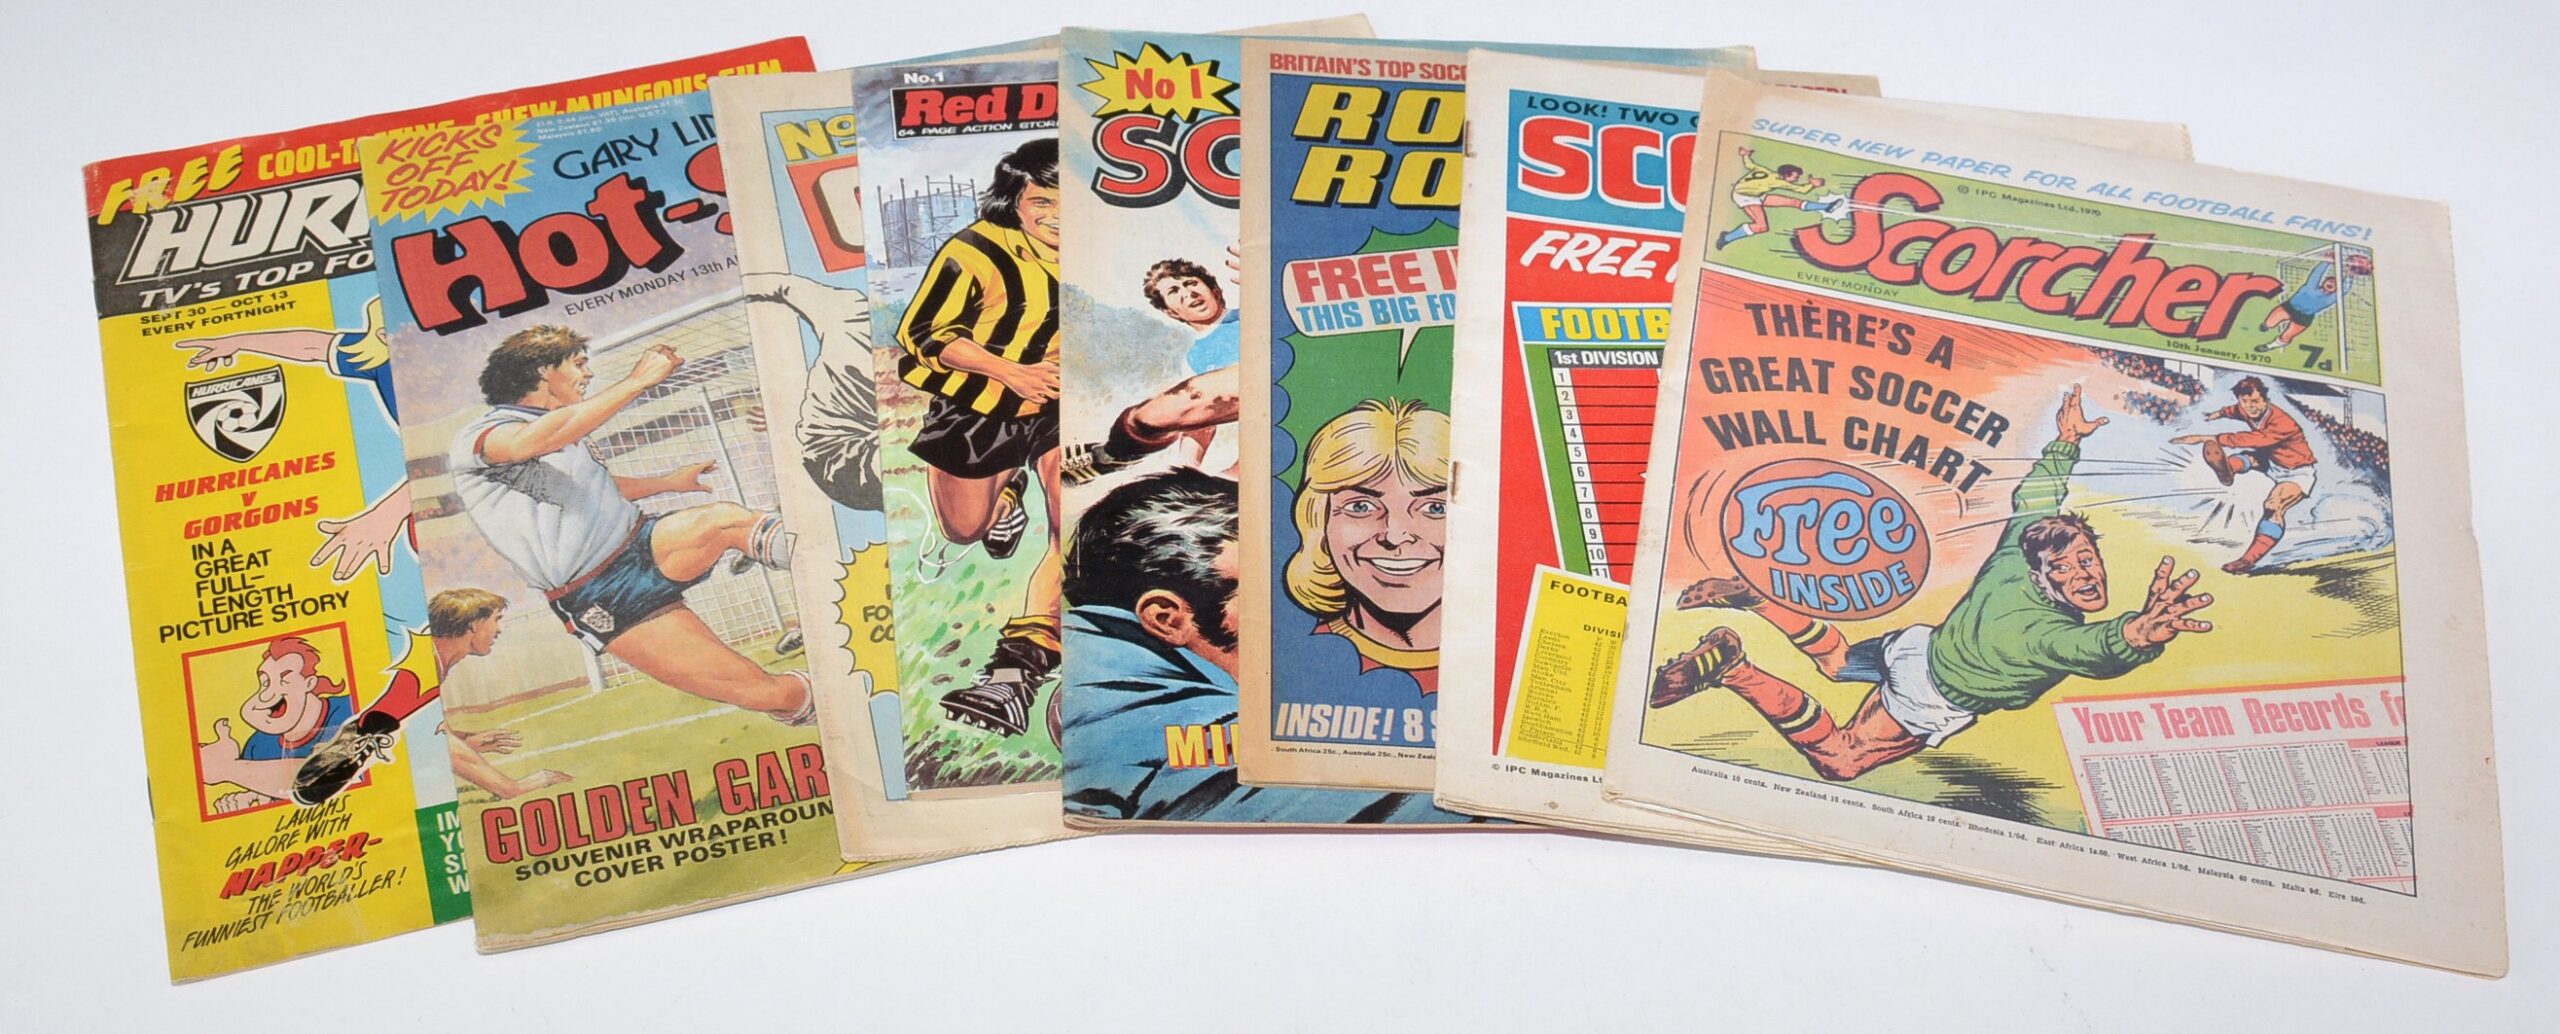 Anderson & Garland Comics Auction 2022. Scorcher, No. 1, with give-away Soccer Wall Chart (1970); Score 'n' Roar, No. 1, with give-away Soccer Table Chart (1970); Roy of the Rovers, No. 1, with Soccer Performance Chart (1976); Hot Shot, No. 1, with give-away Soccer Fact Finder (1988); and other British Football No. 1 comics.